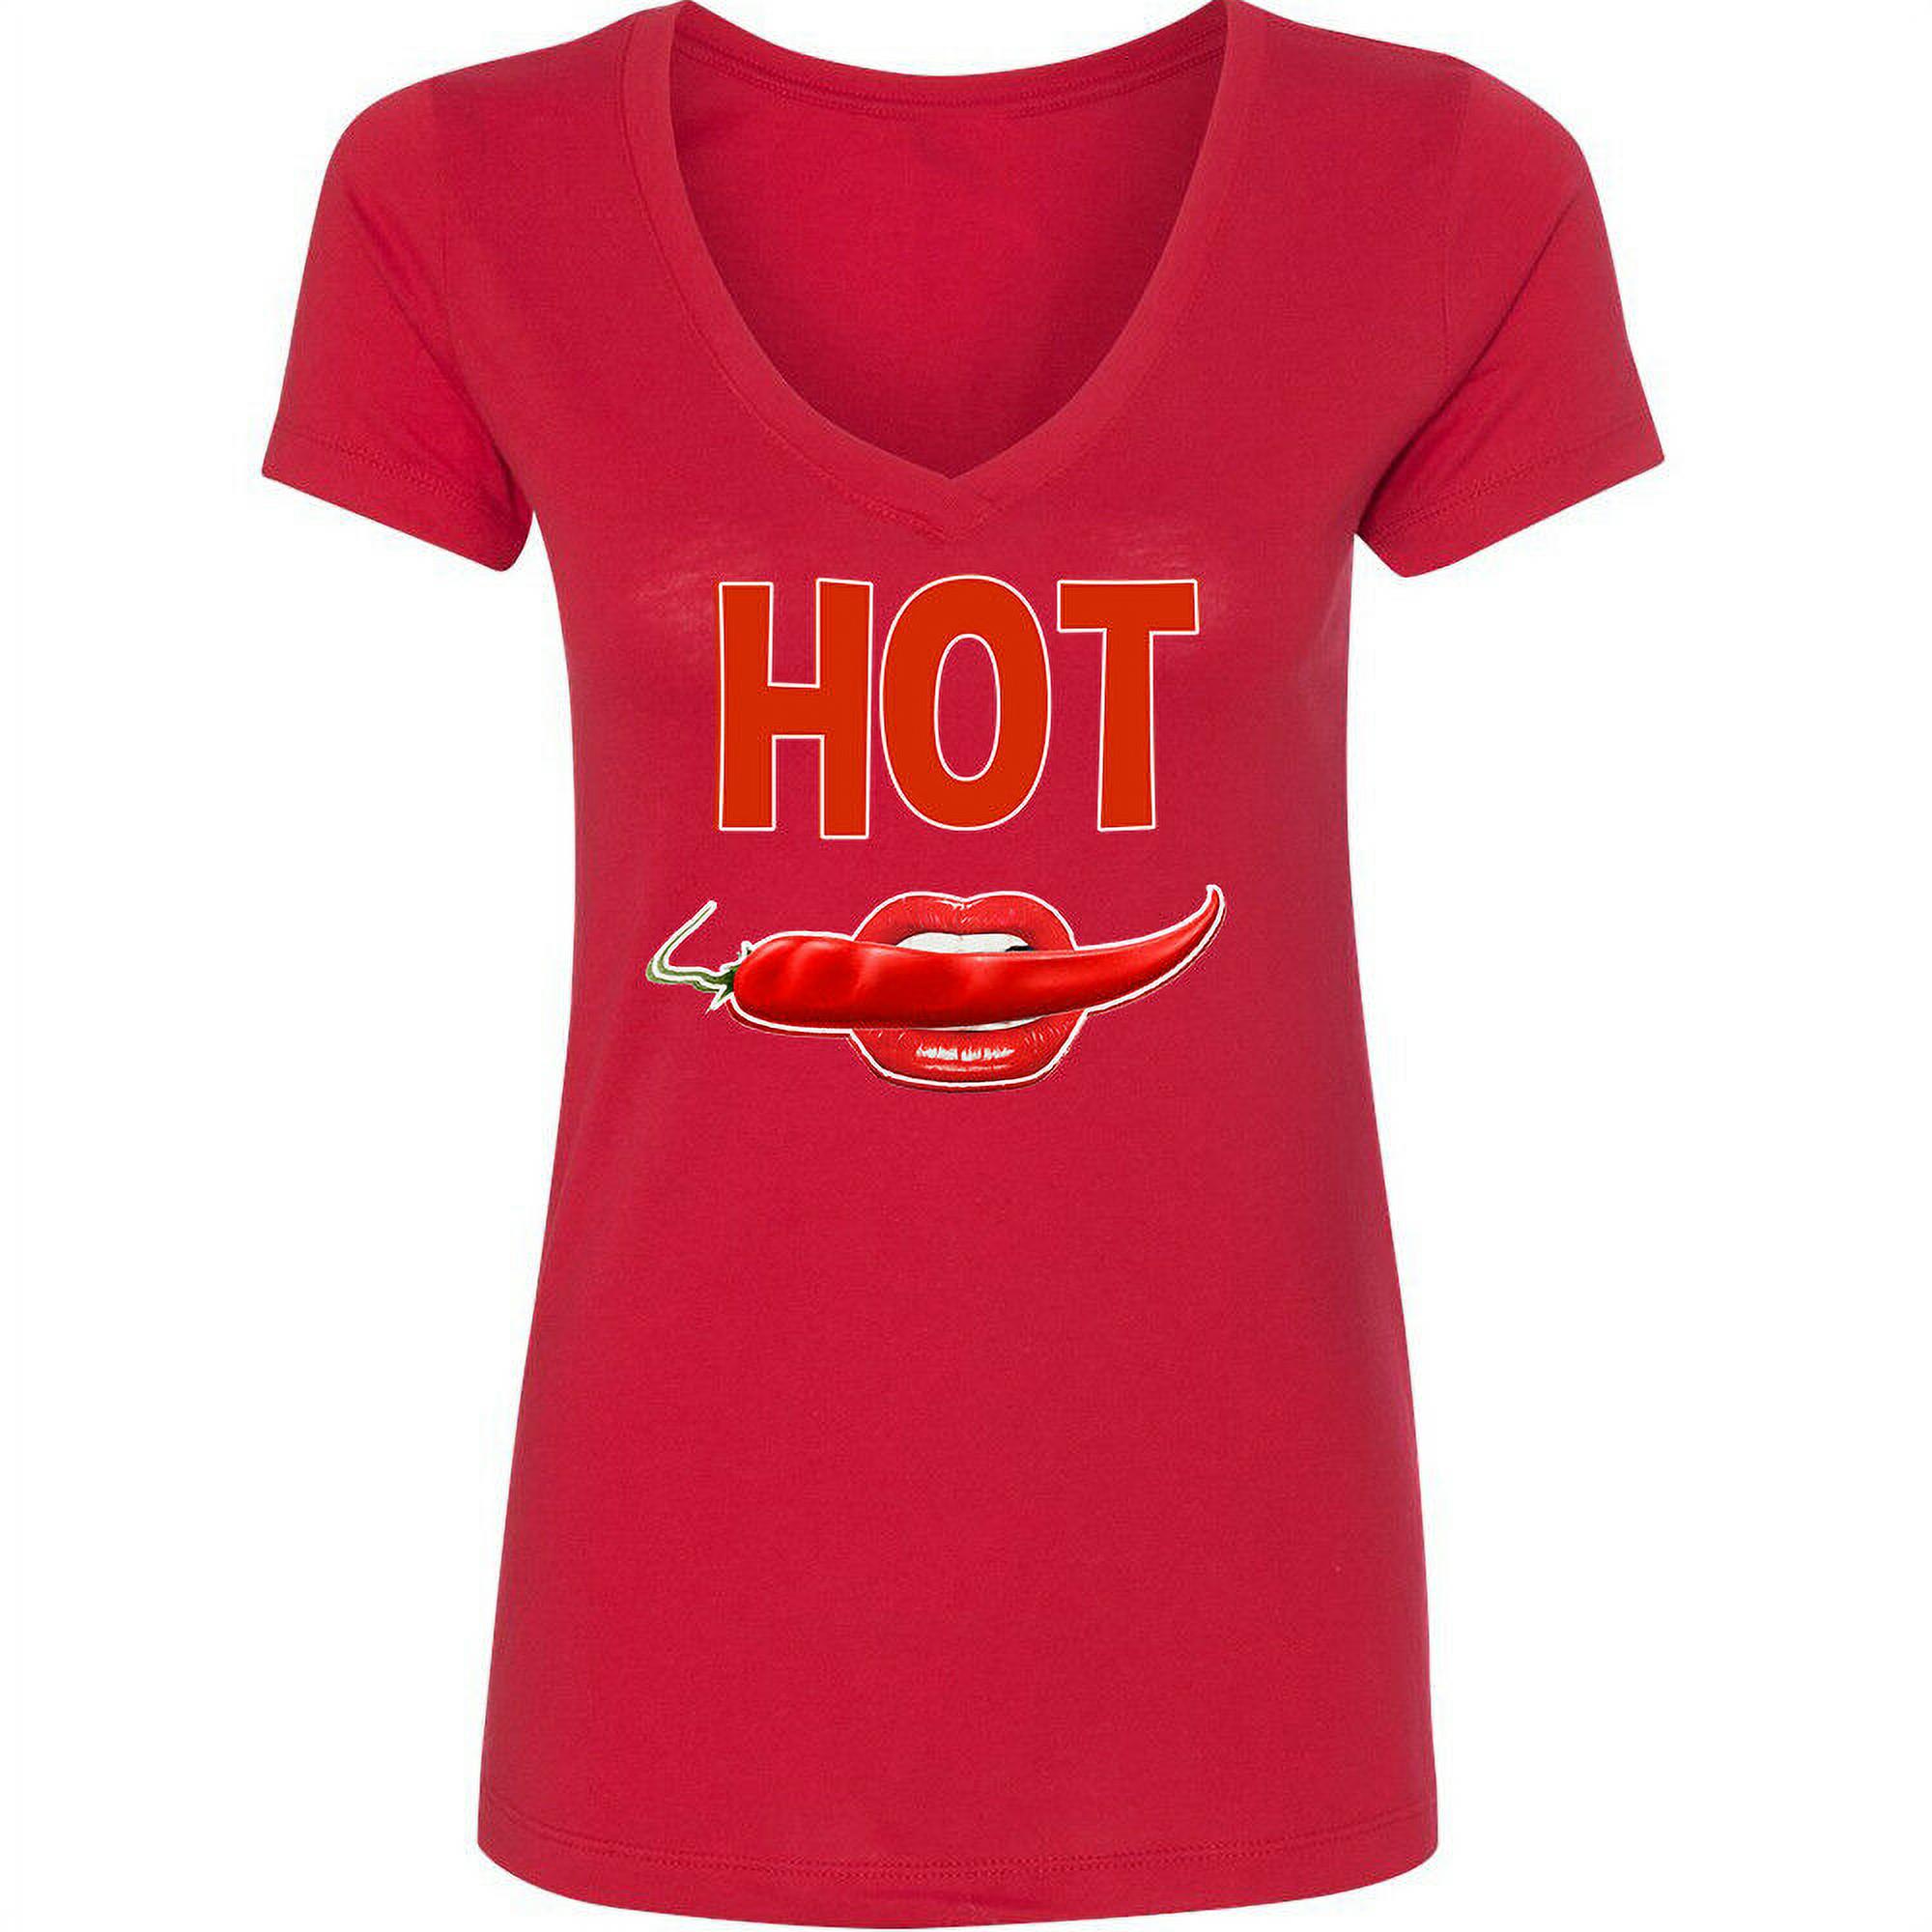 Sexy Hot Red Pepper Lips Print VNECK Lady Shirt Women Tee Color Red 2X-Large - image 1 of 2